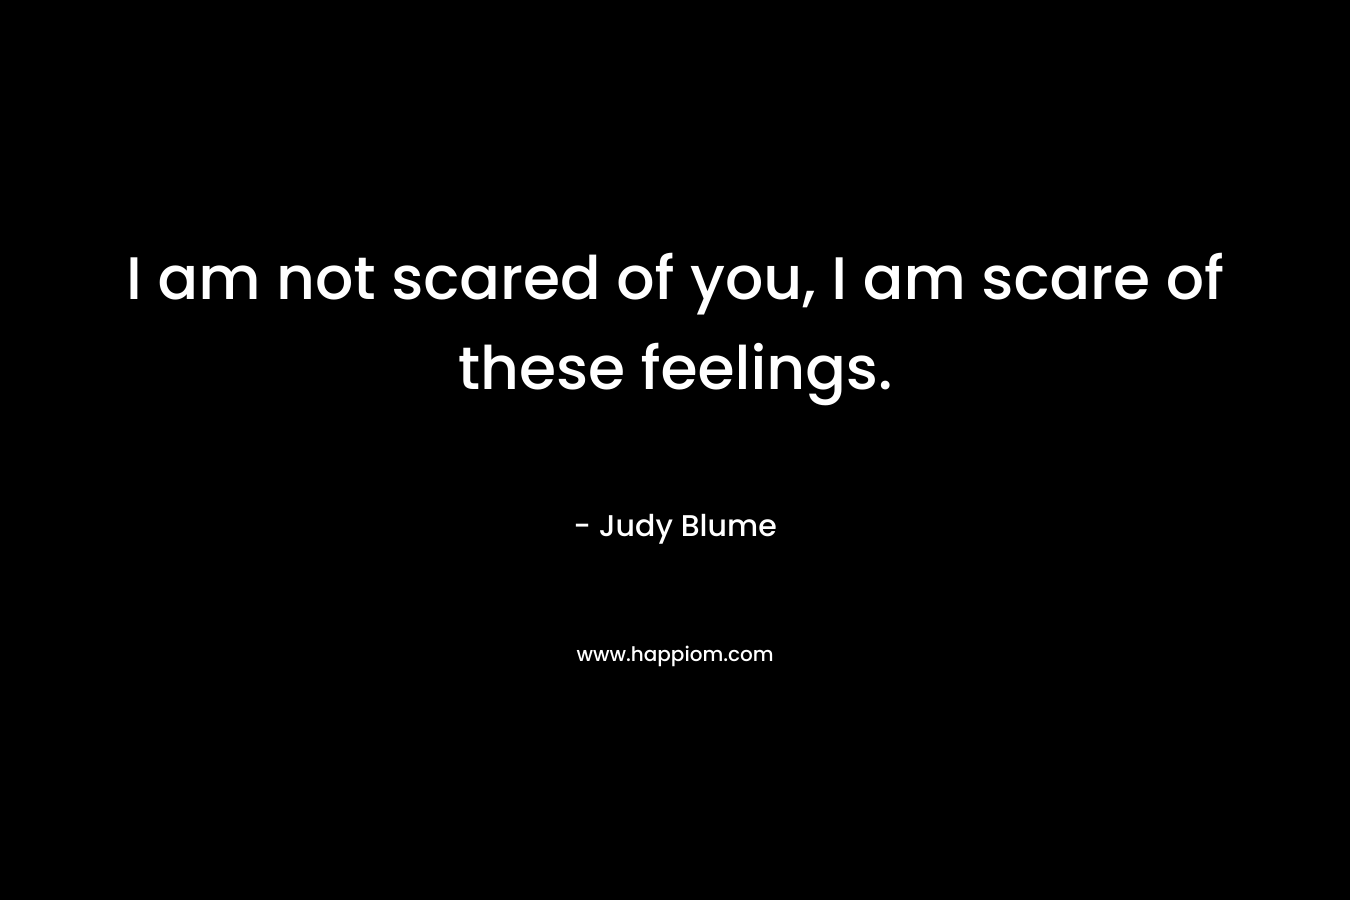 I am not scared of you, I am scare of these feelings. – Judy Blume